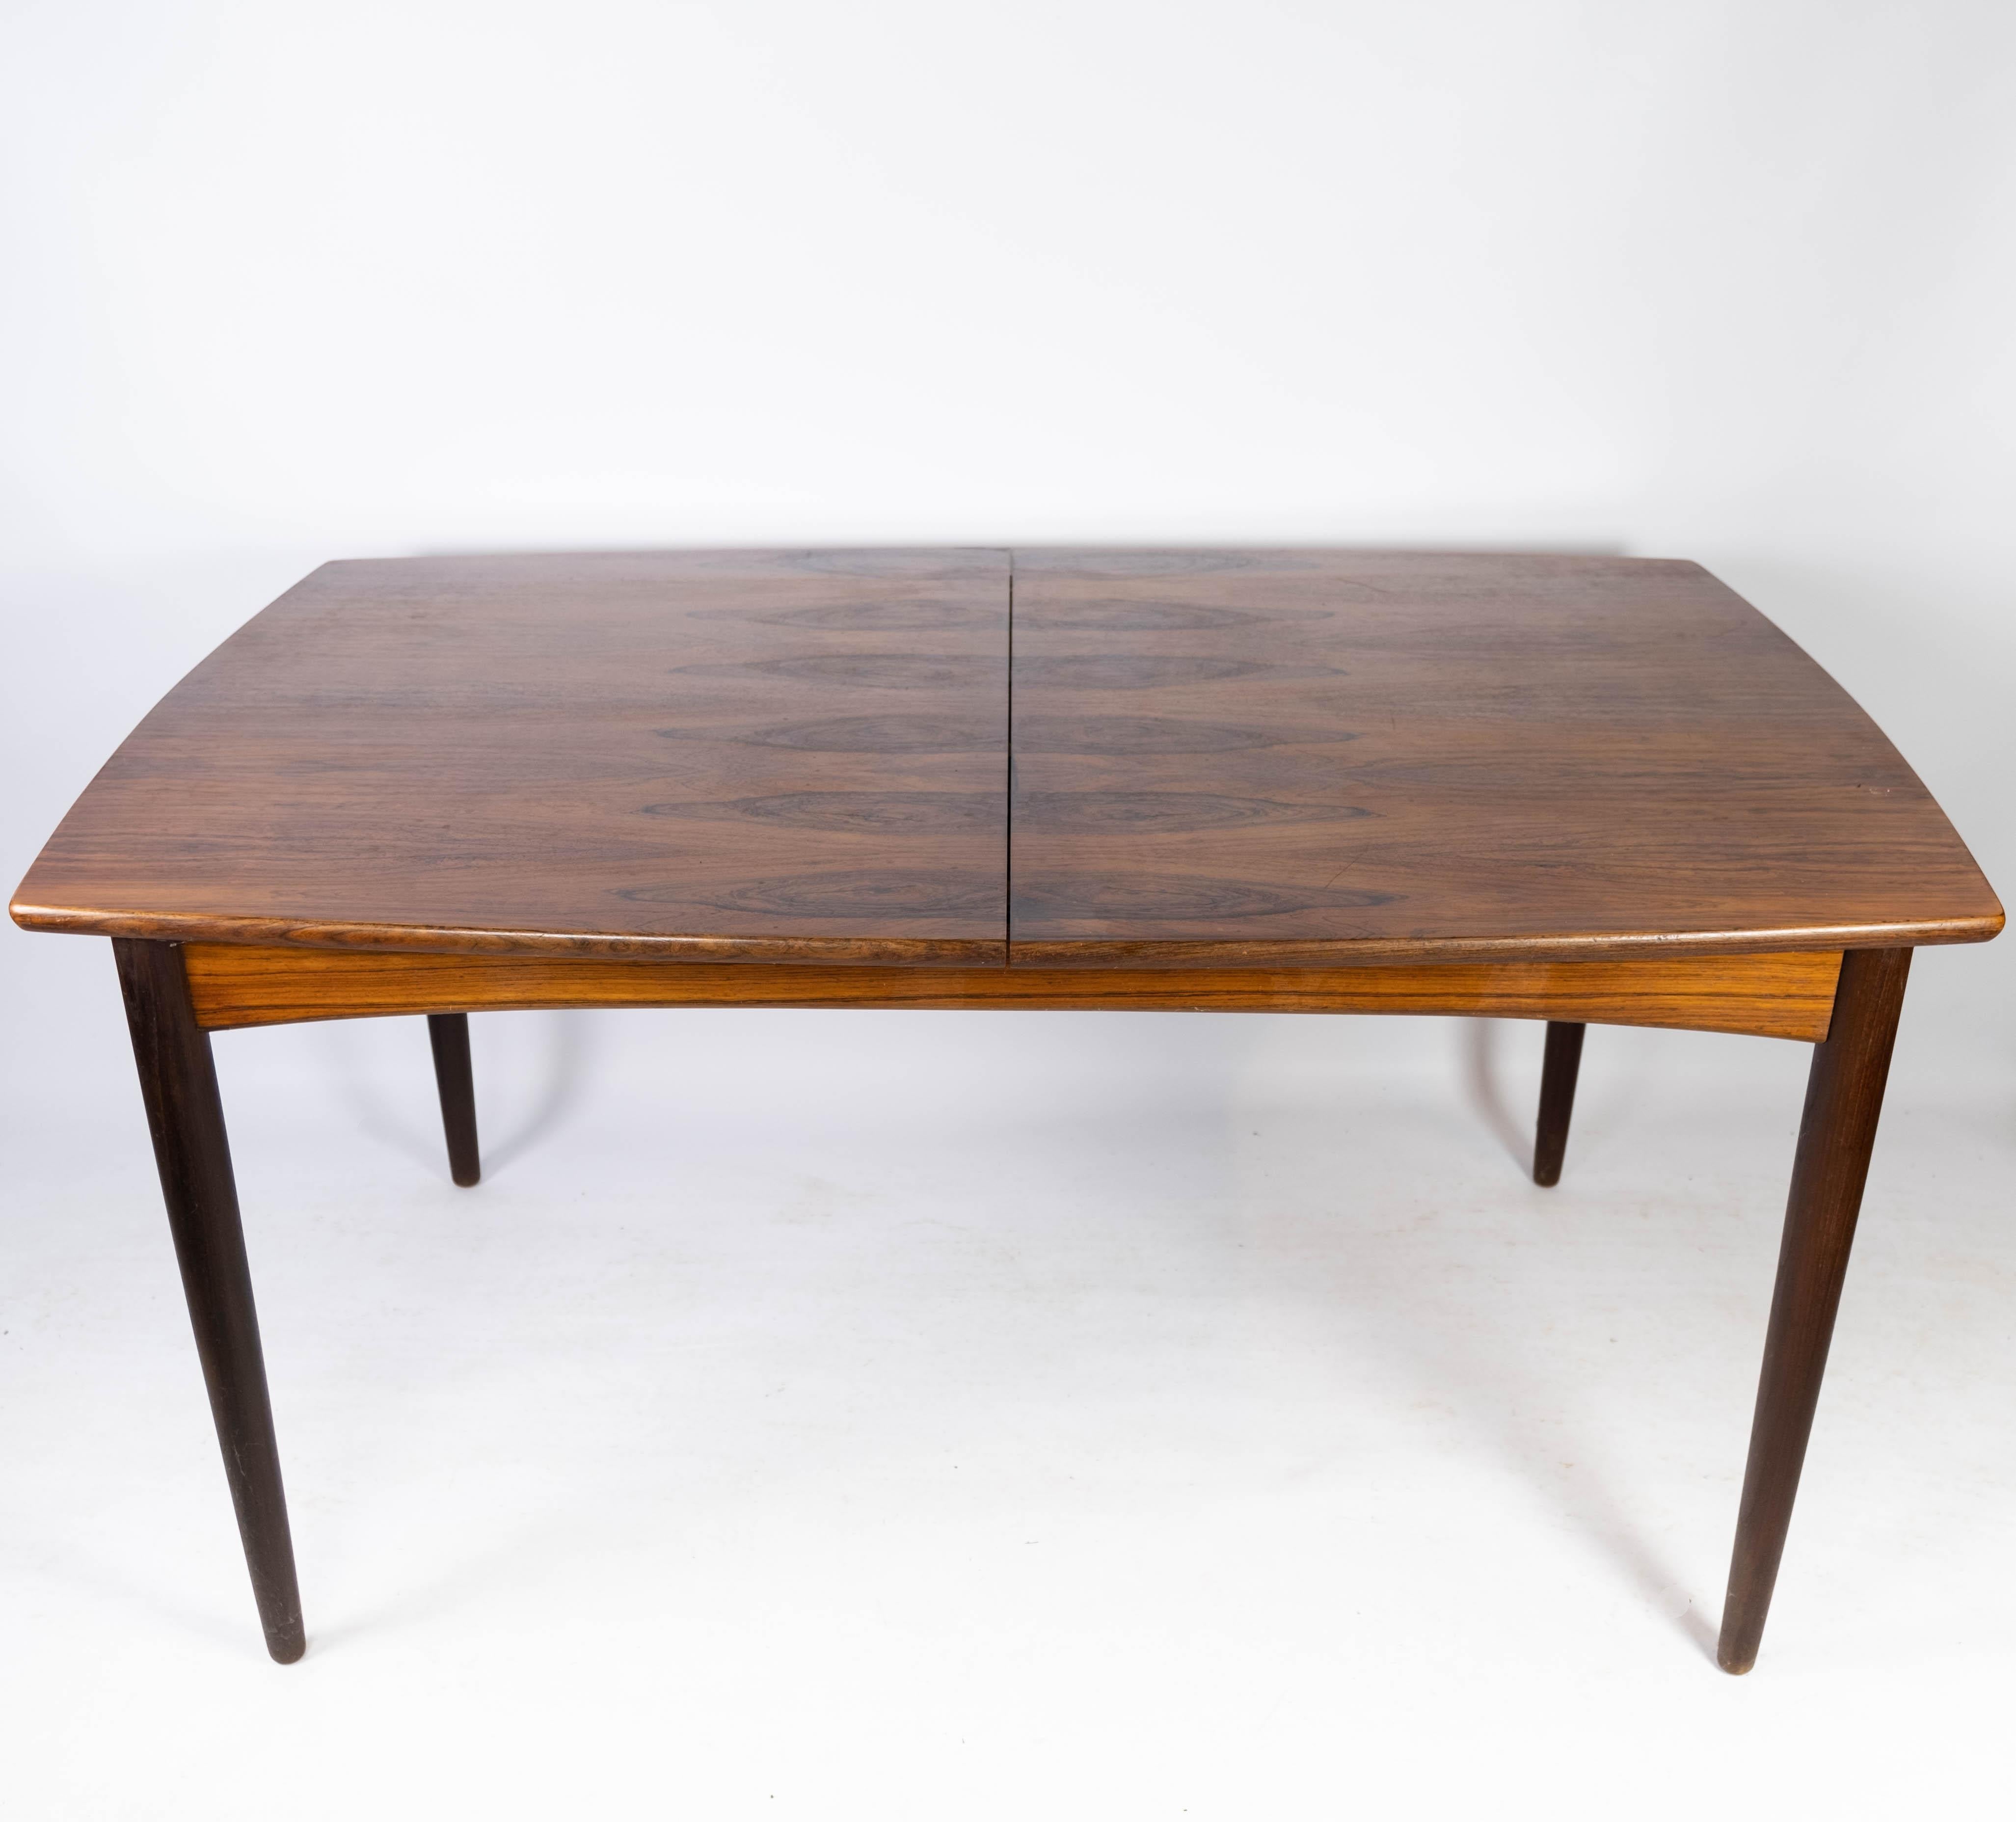 Dining table in rosewood with extensions, of Danish design from the 1960s. The table is in great vintage condition. 
Measurements with extention are 256 cm.